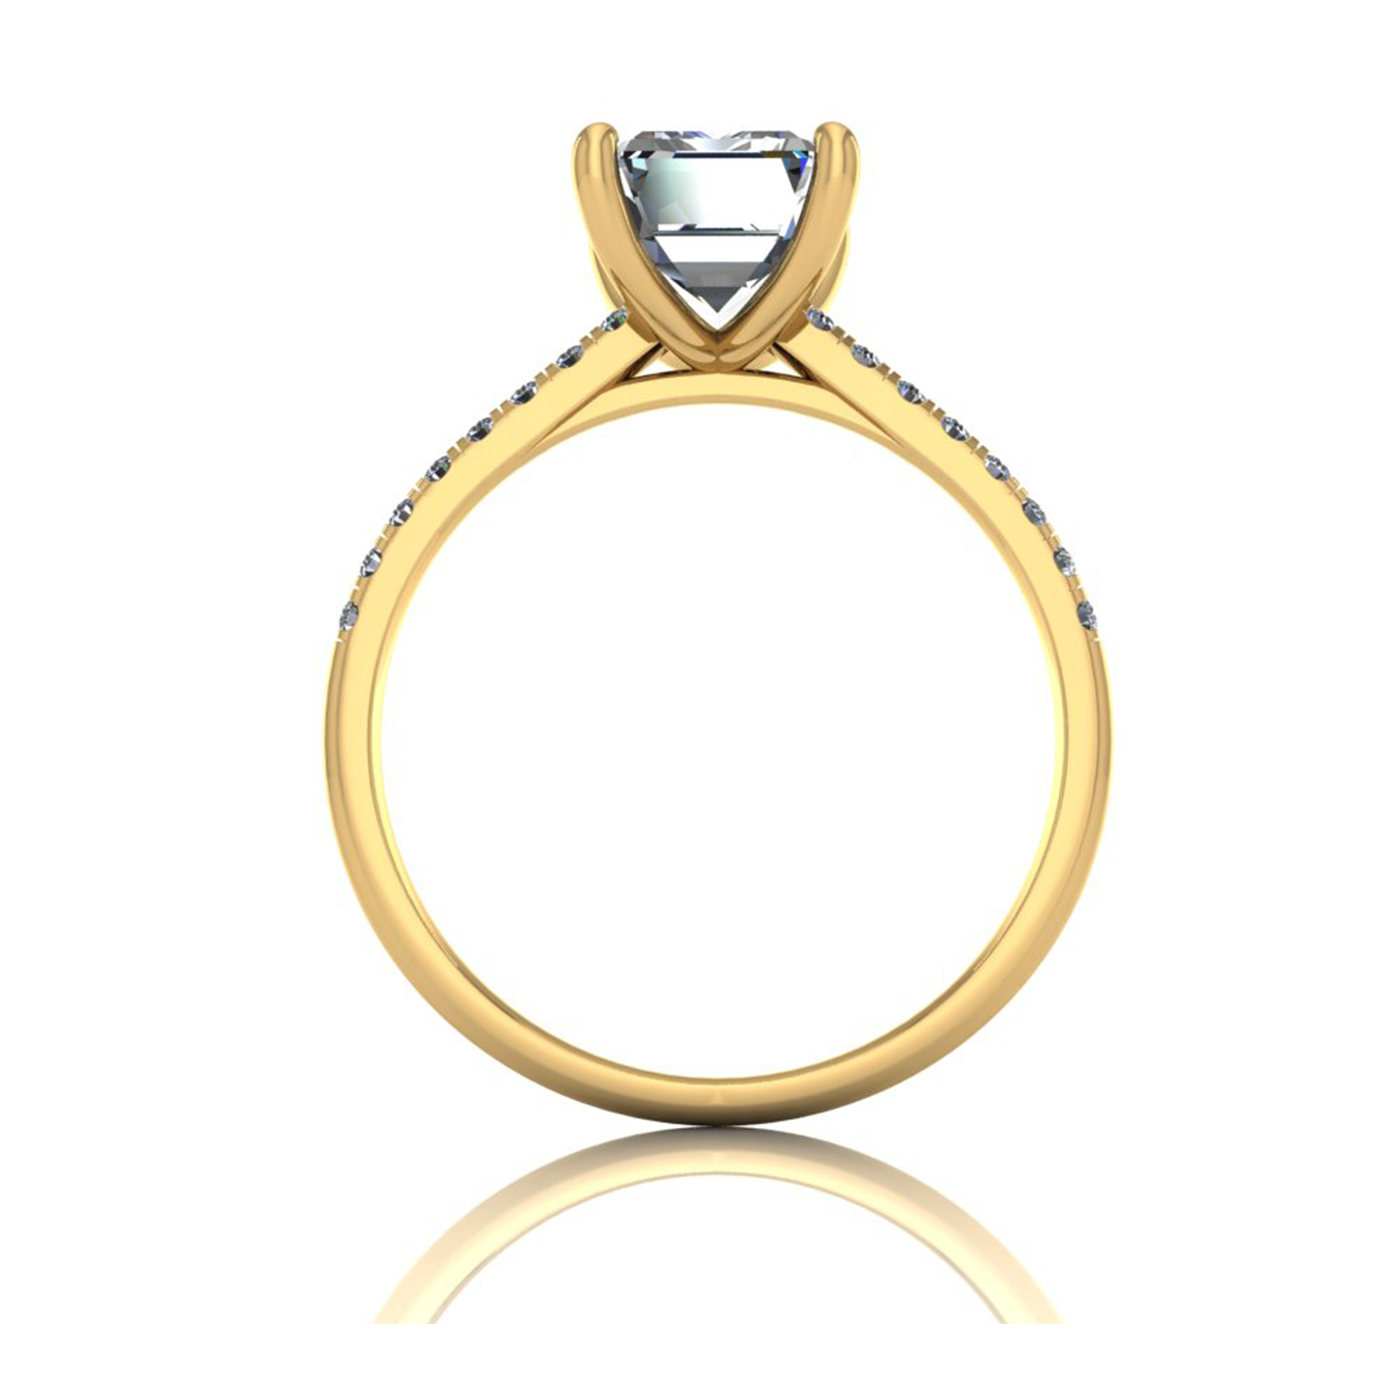 18k yellow gold 1.5ct 4 prongs emerald cut diamond engagement ring with whisper thin pavÉ set band